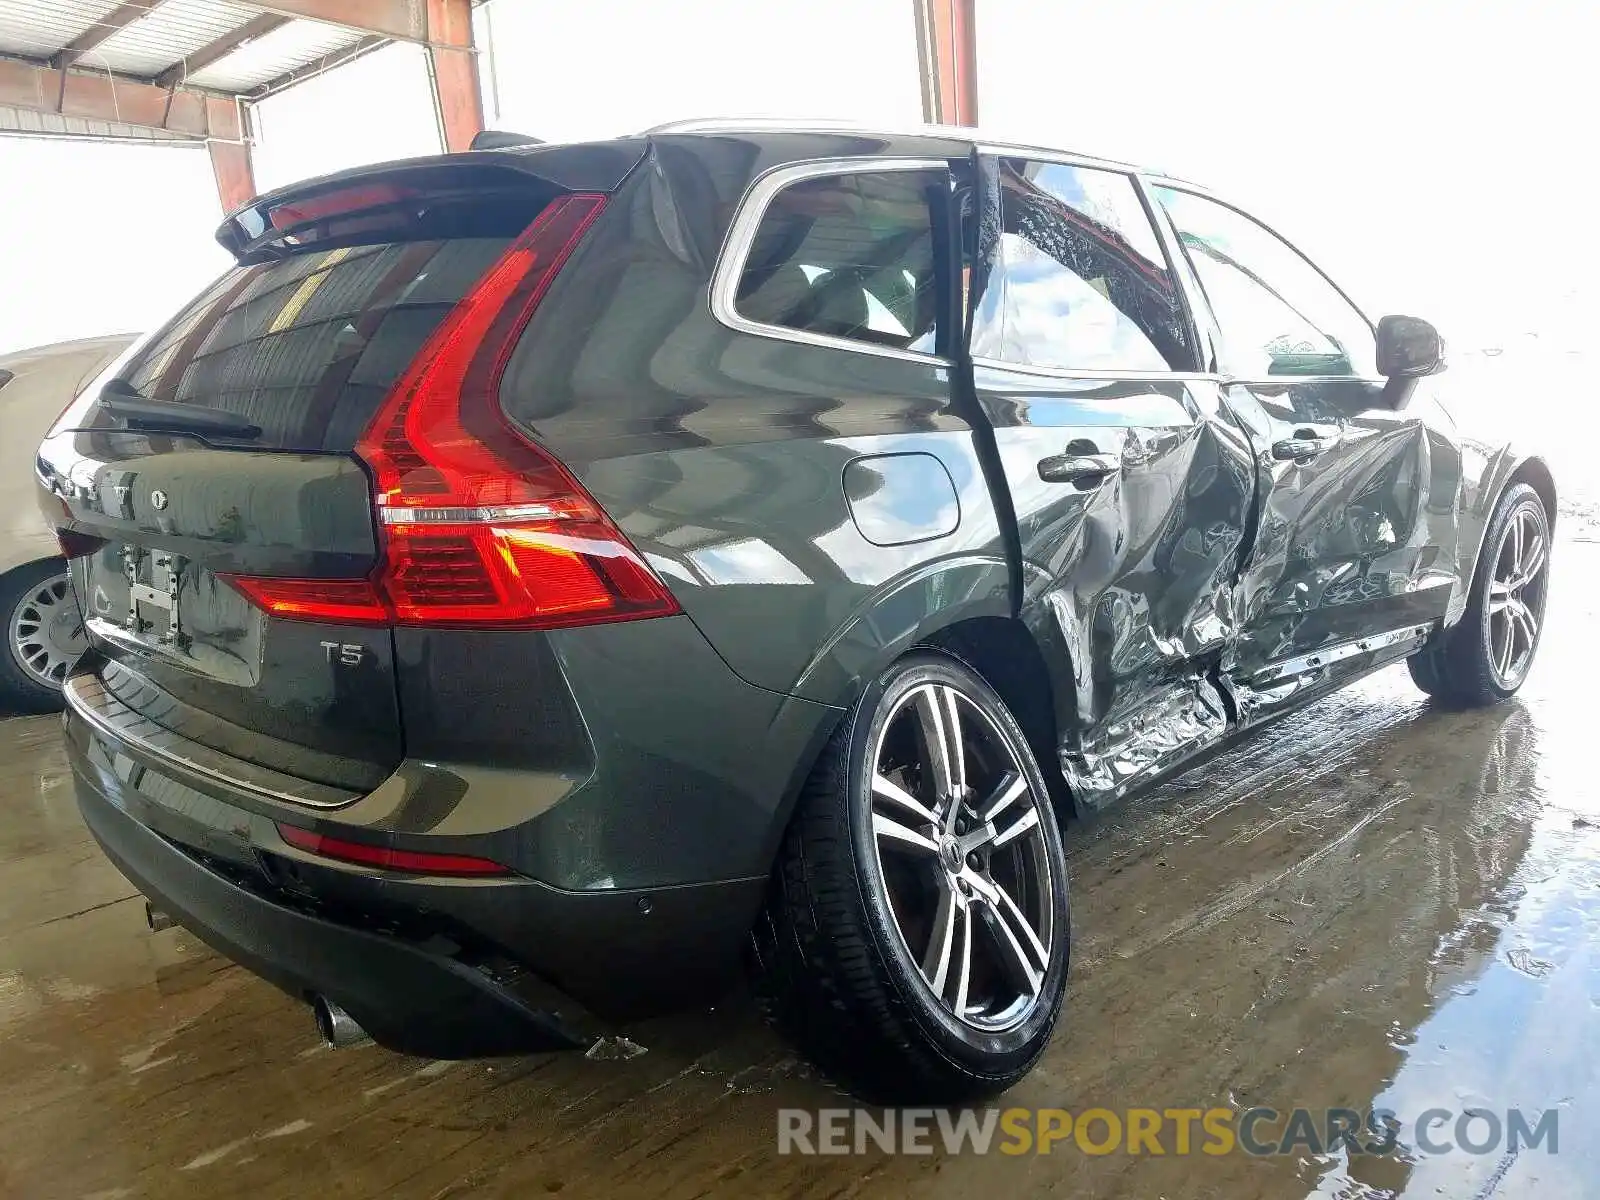 4 Photograph of a damaged car LYV102DK9KB202739 VOLVO XC60 T5 MO 2019